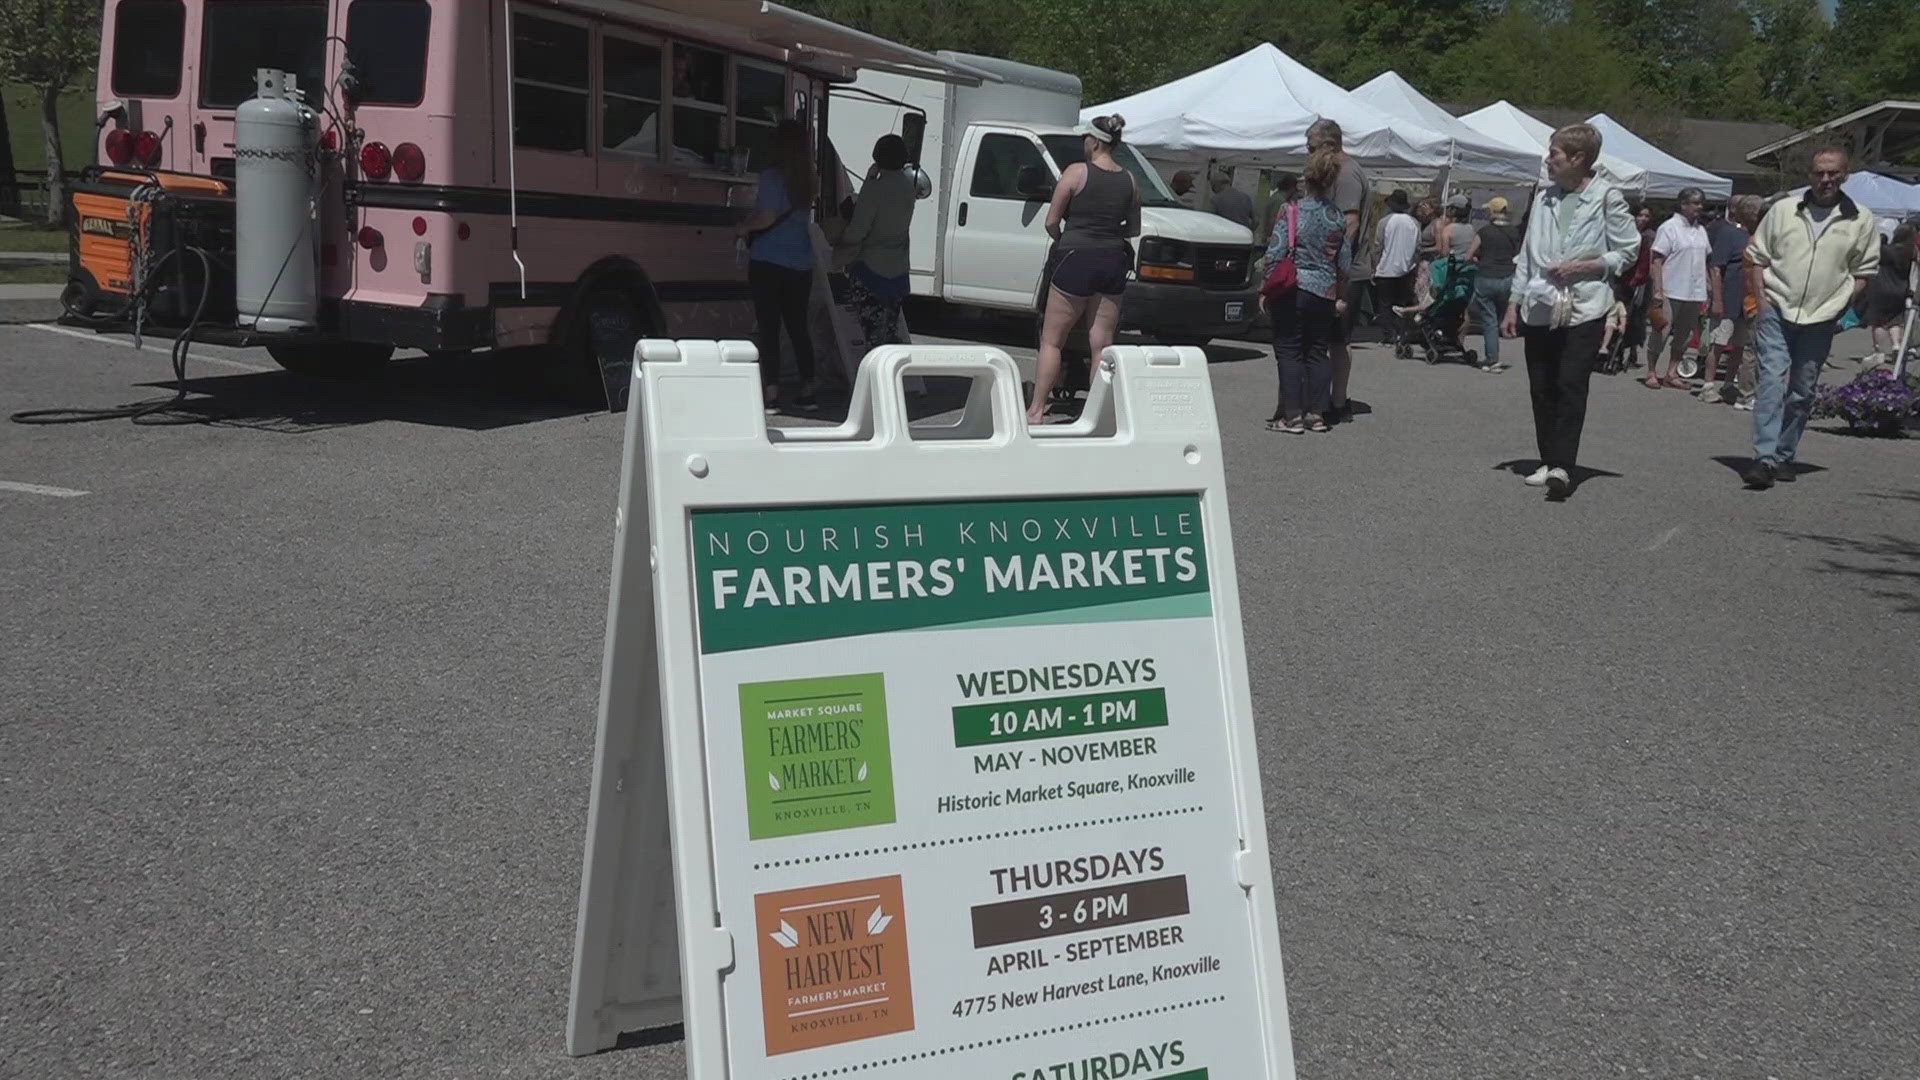 Visitors at New Harvest Park have a weekly chance to grab locally-grown produce, eggs, meat as well as artisan crafts.